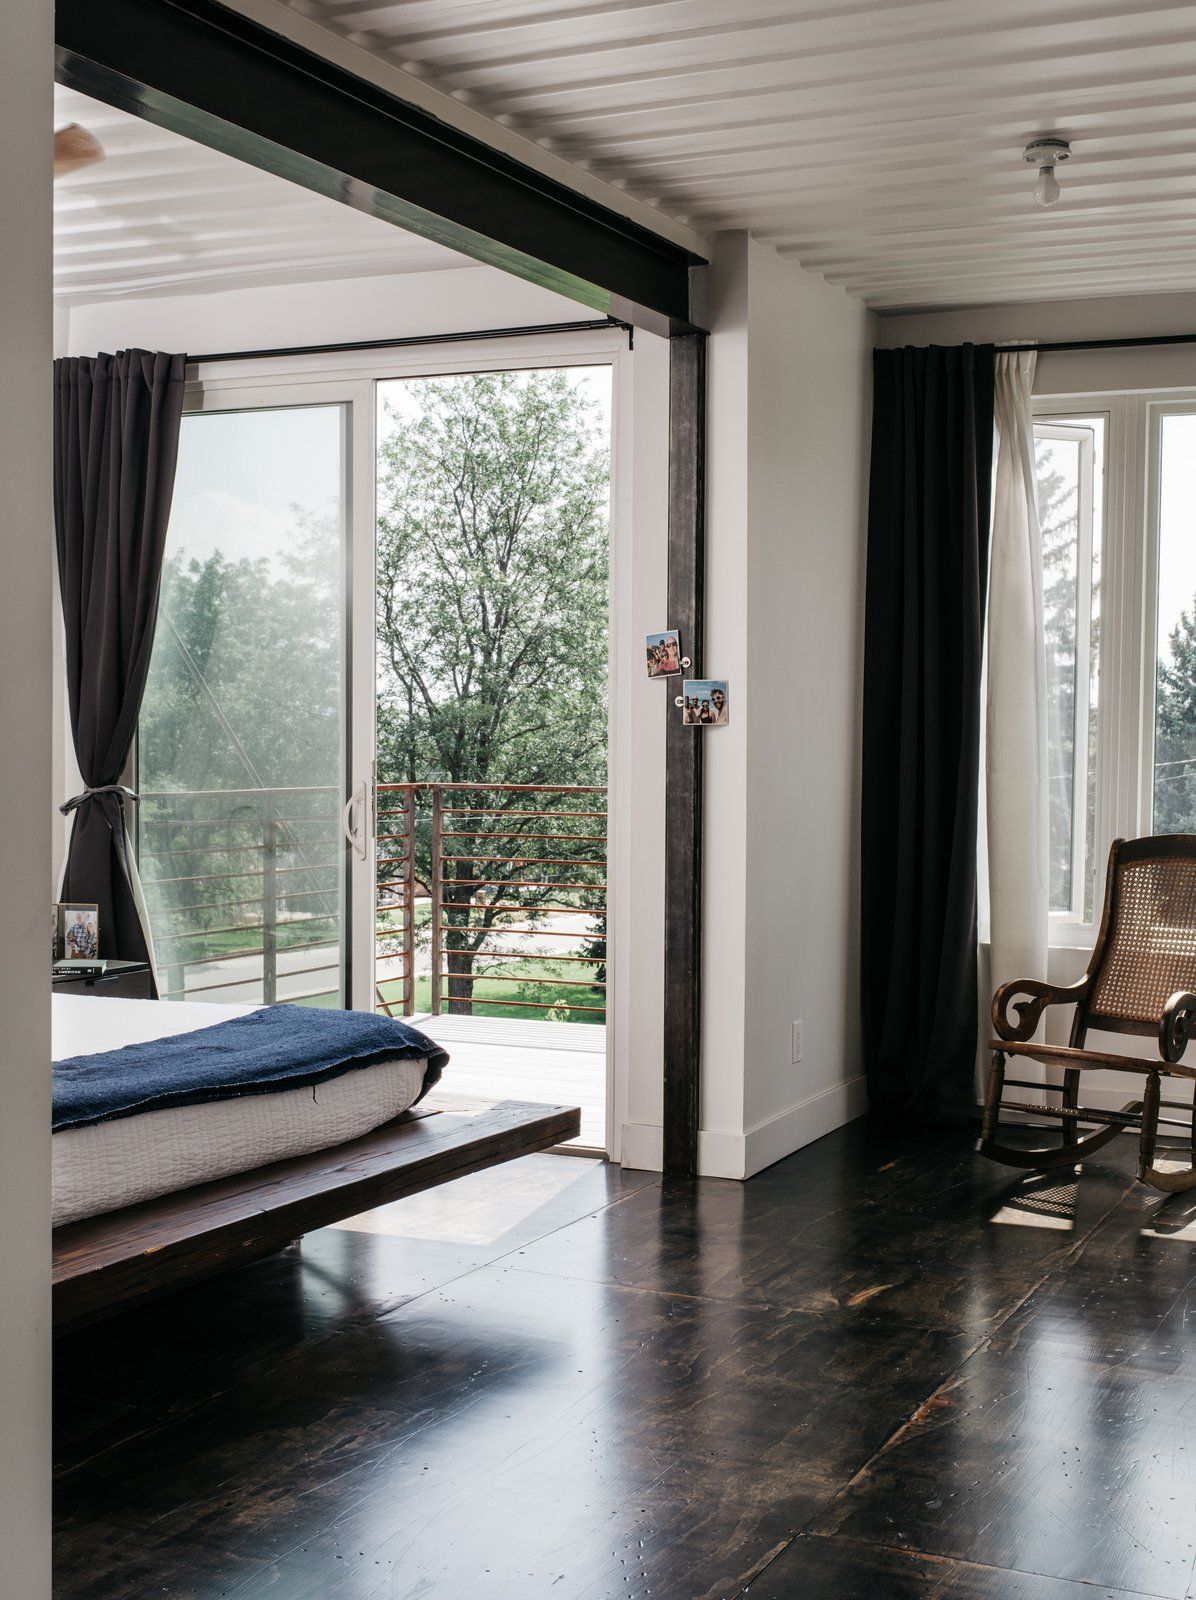 The master bedroom features a platform bed, some chairs, large windows and an entrance to the balcony to enjoy fresh air